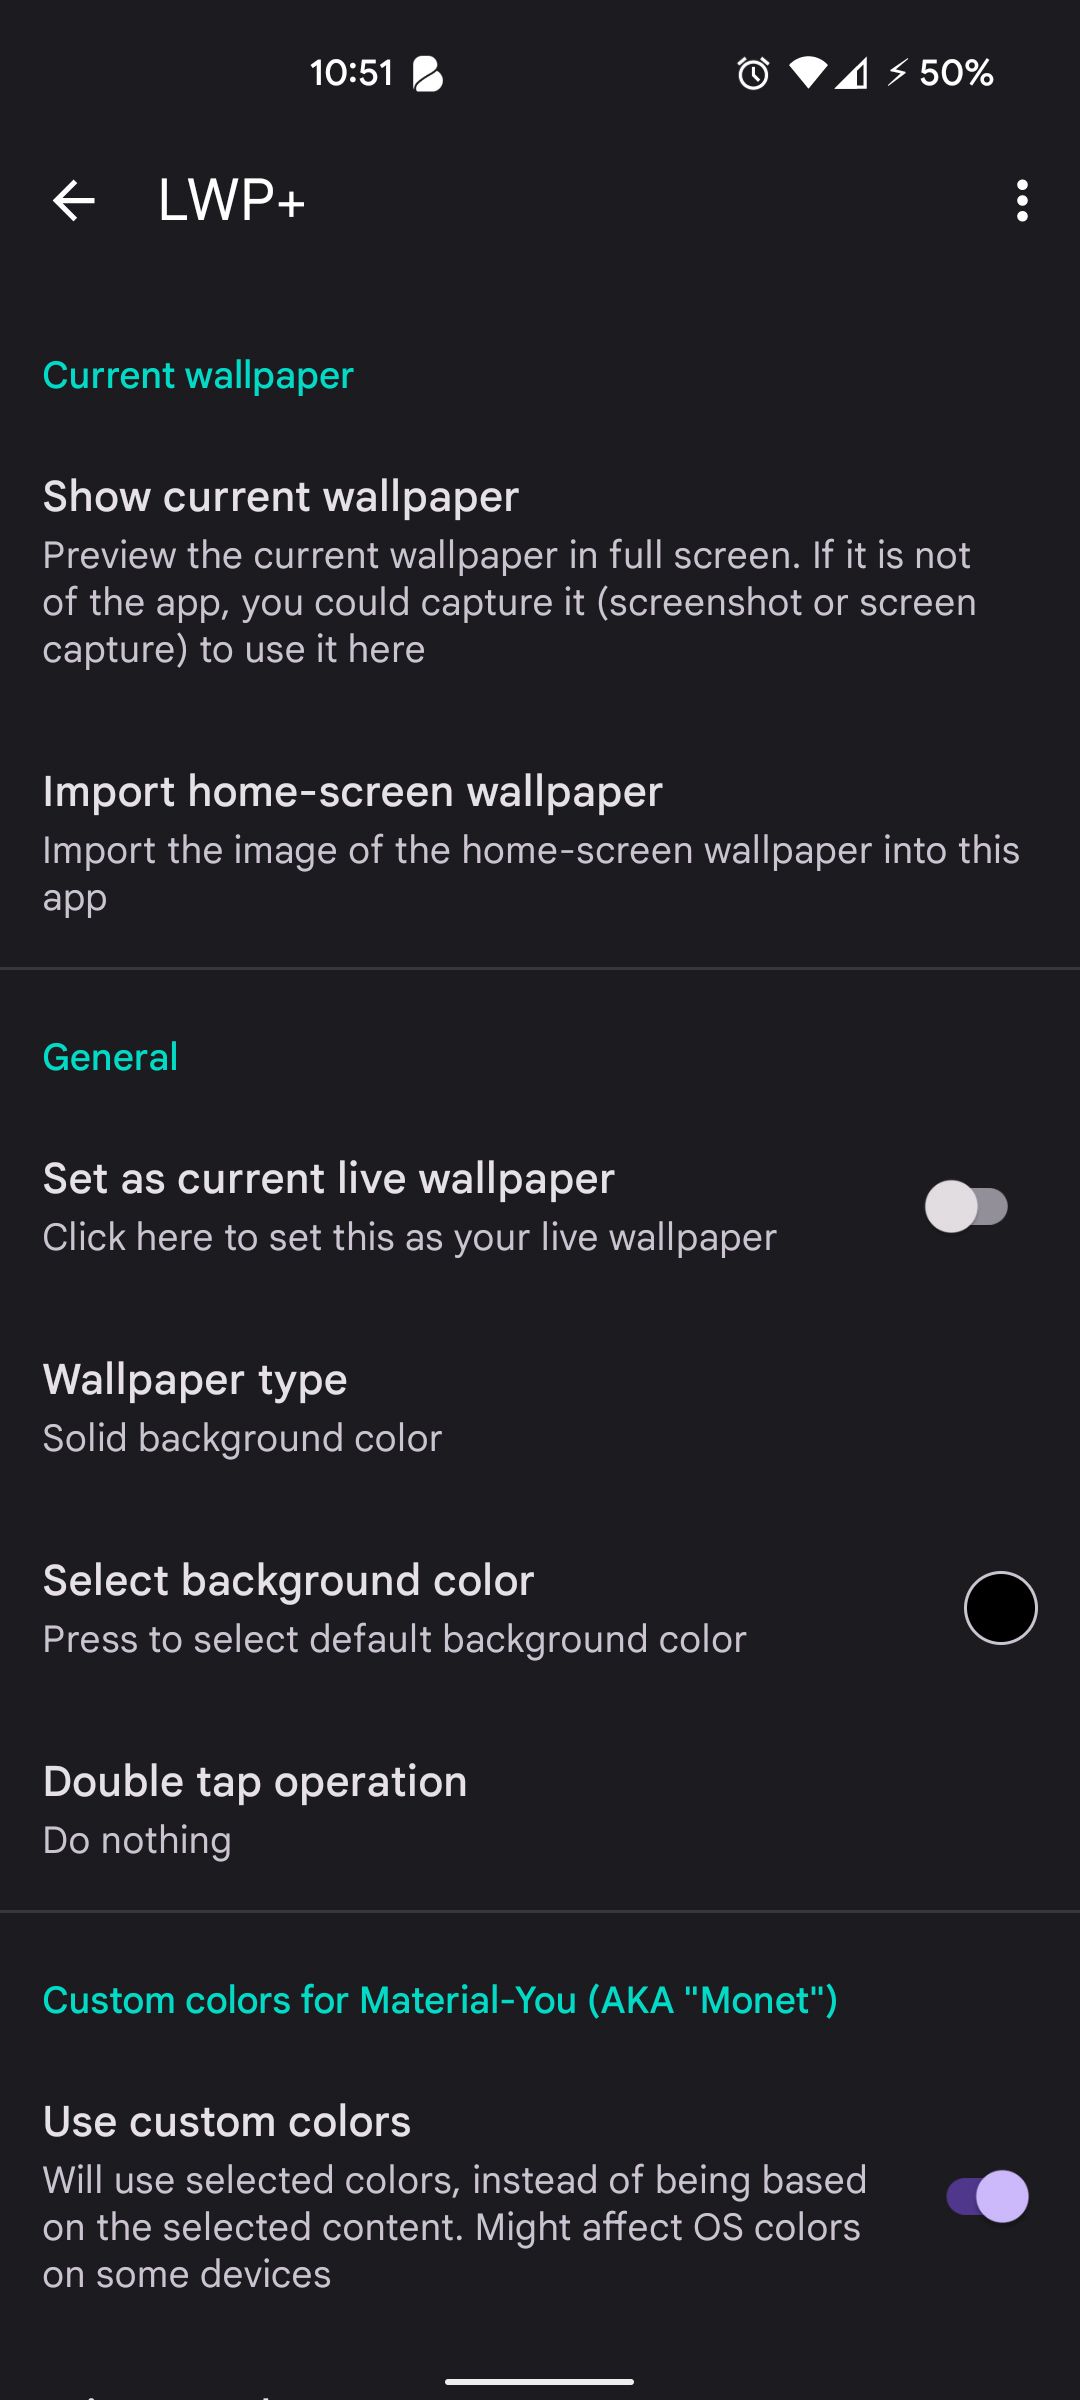 LWP+ app with import wallpaper option